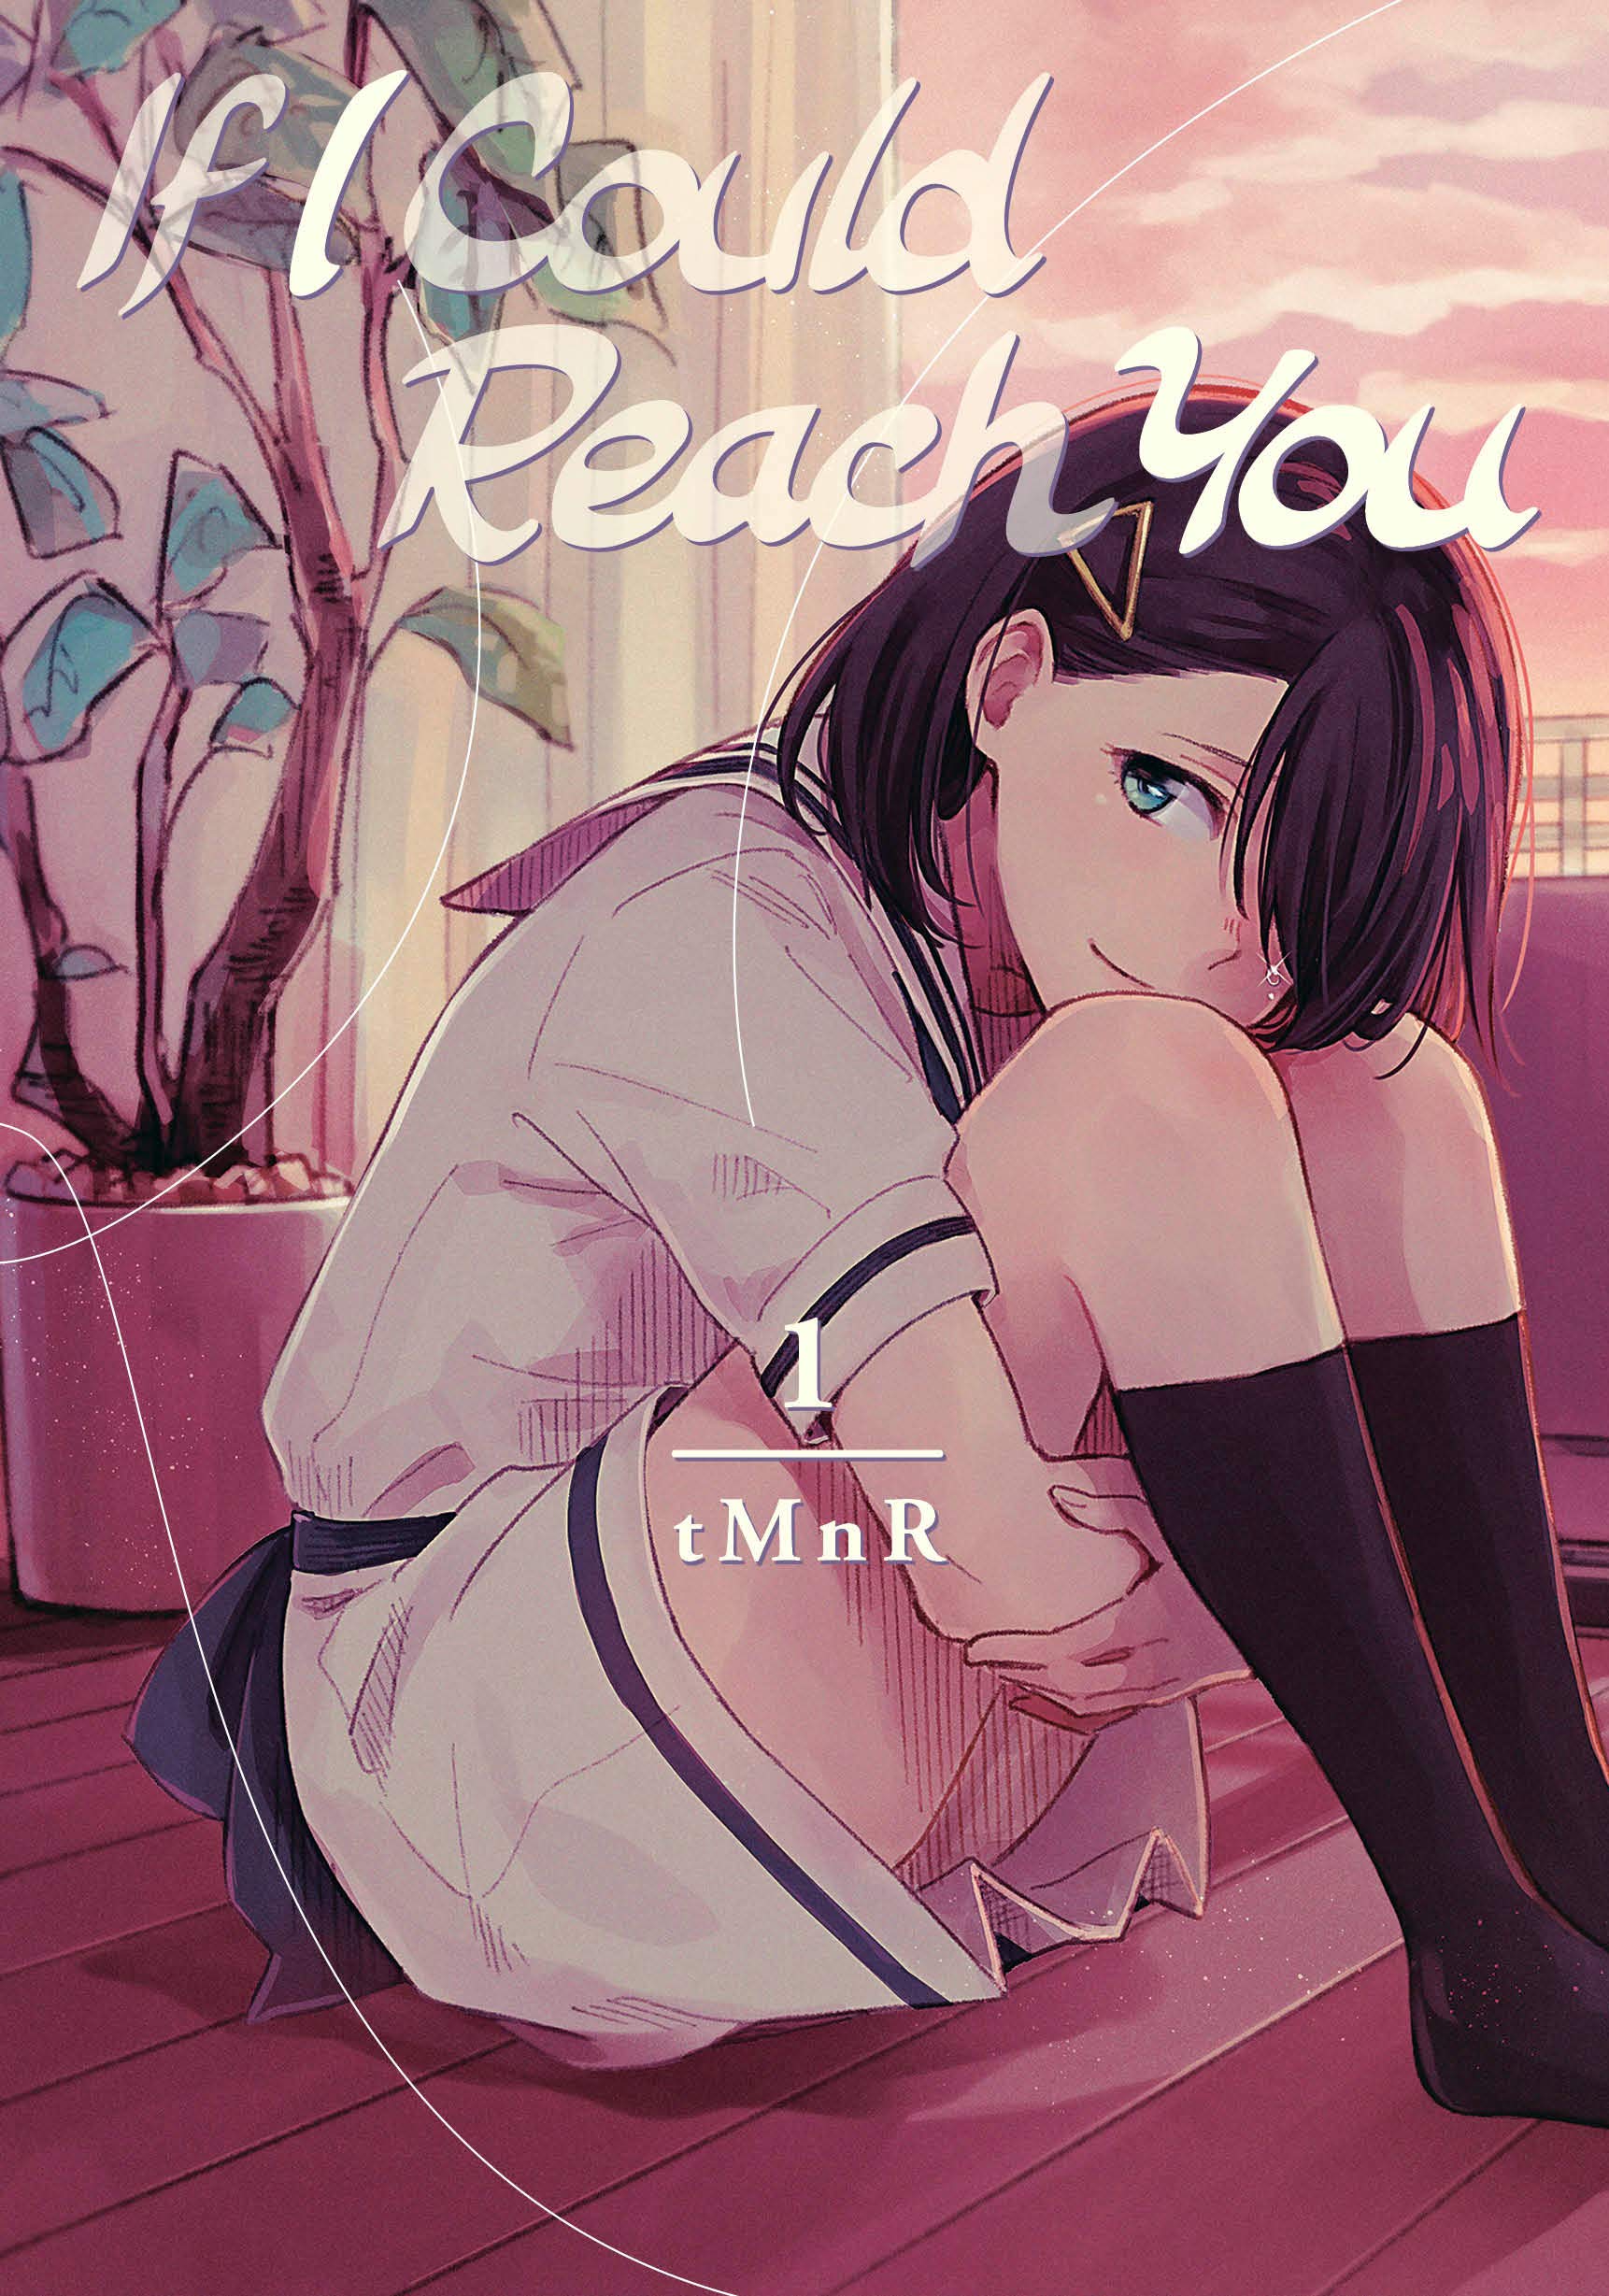 If I Could Reach You - Volume 1